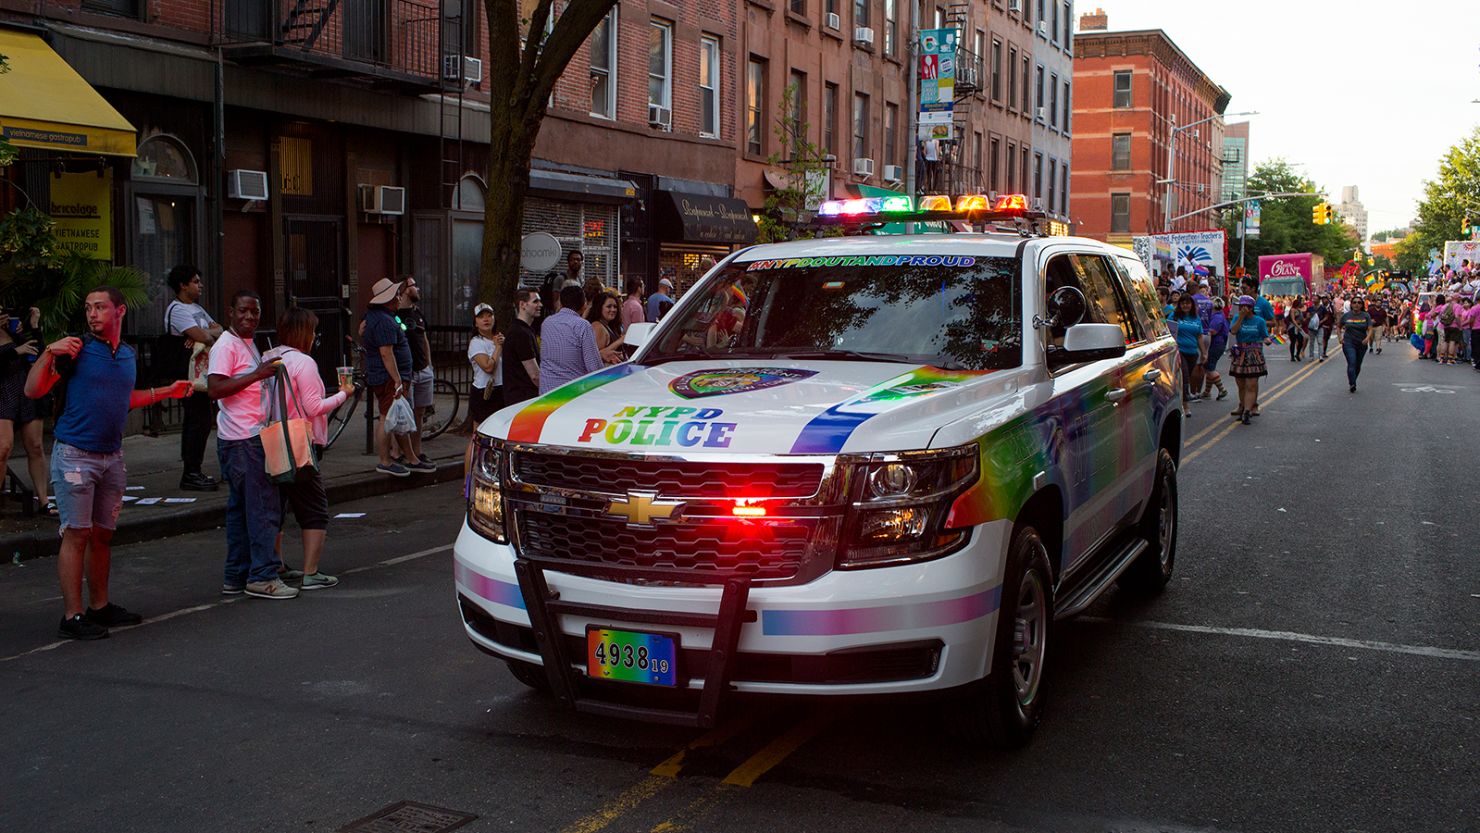 Brooklyn's annual Gay Pride Parade in 2019. This year, both New York City and Denver have said police will no longer be allowed as exhibitors at Pride.